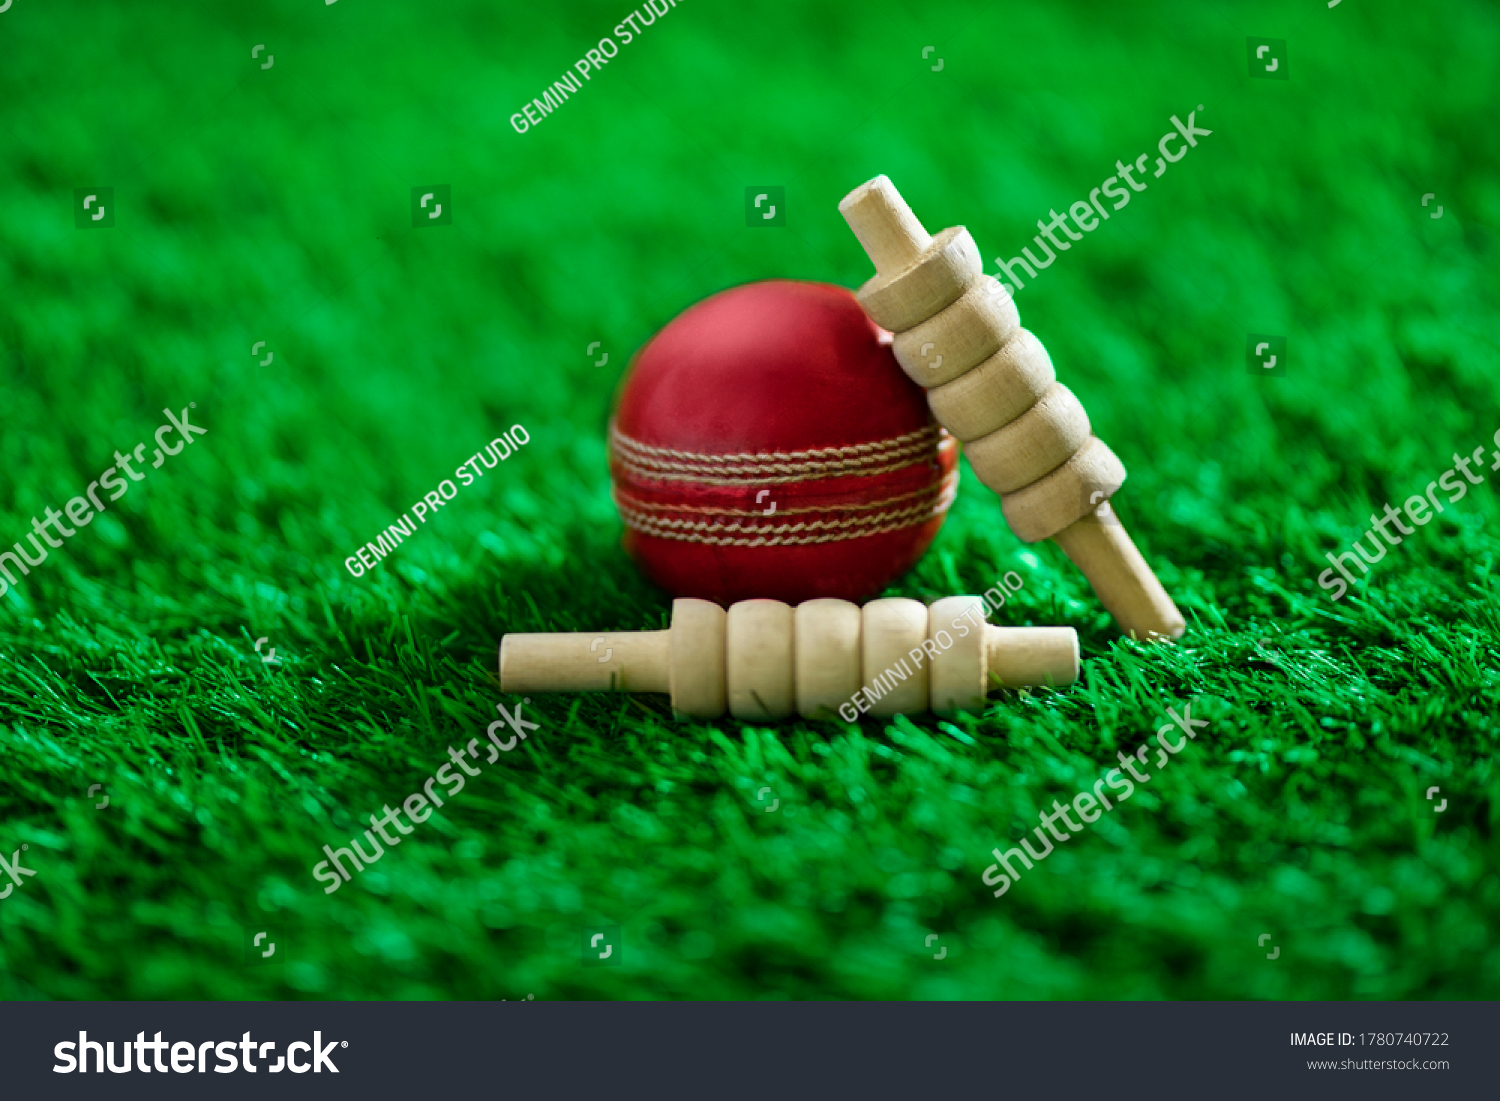 cricket ball and bails on green grass pitch #1780740722